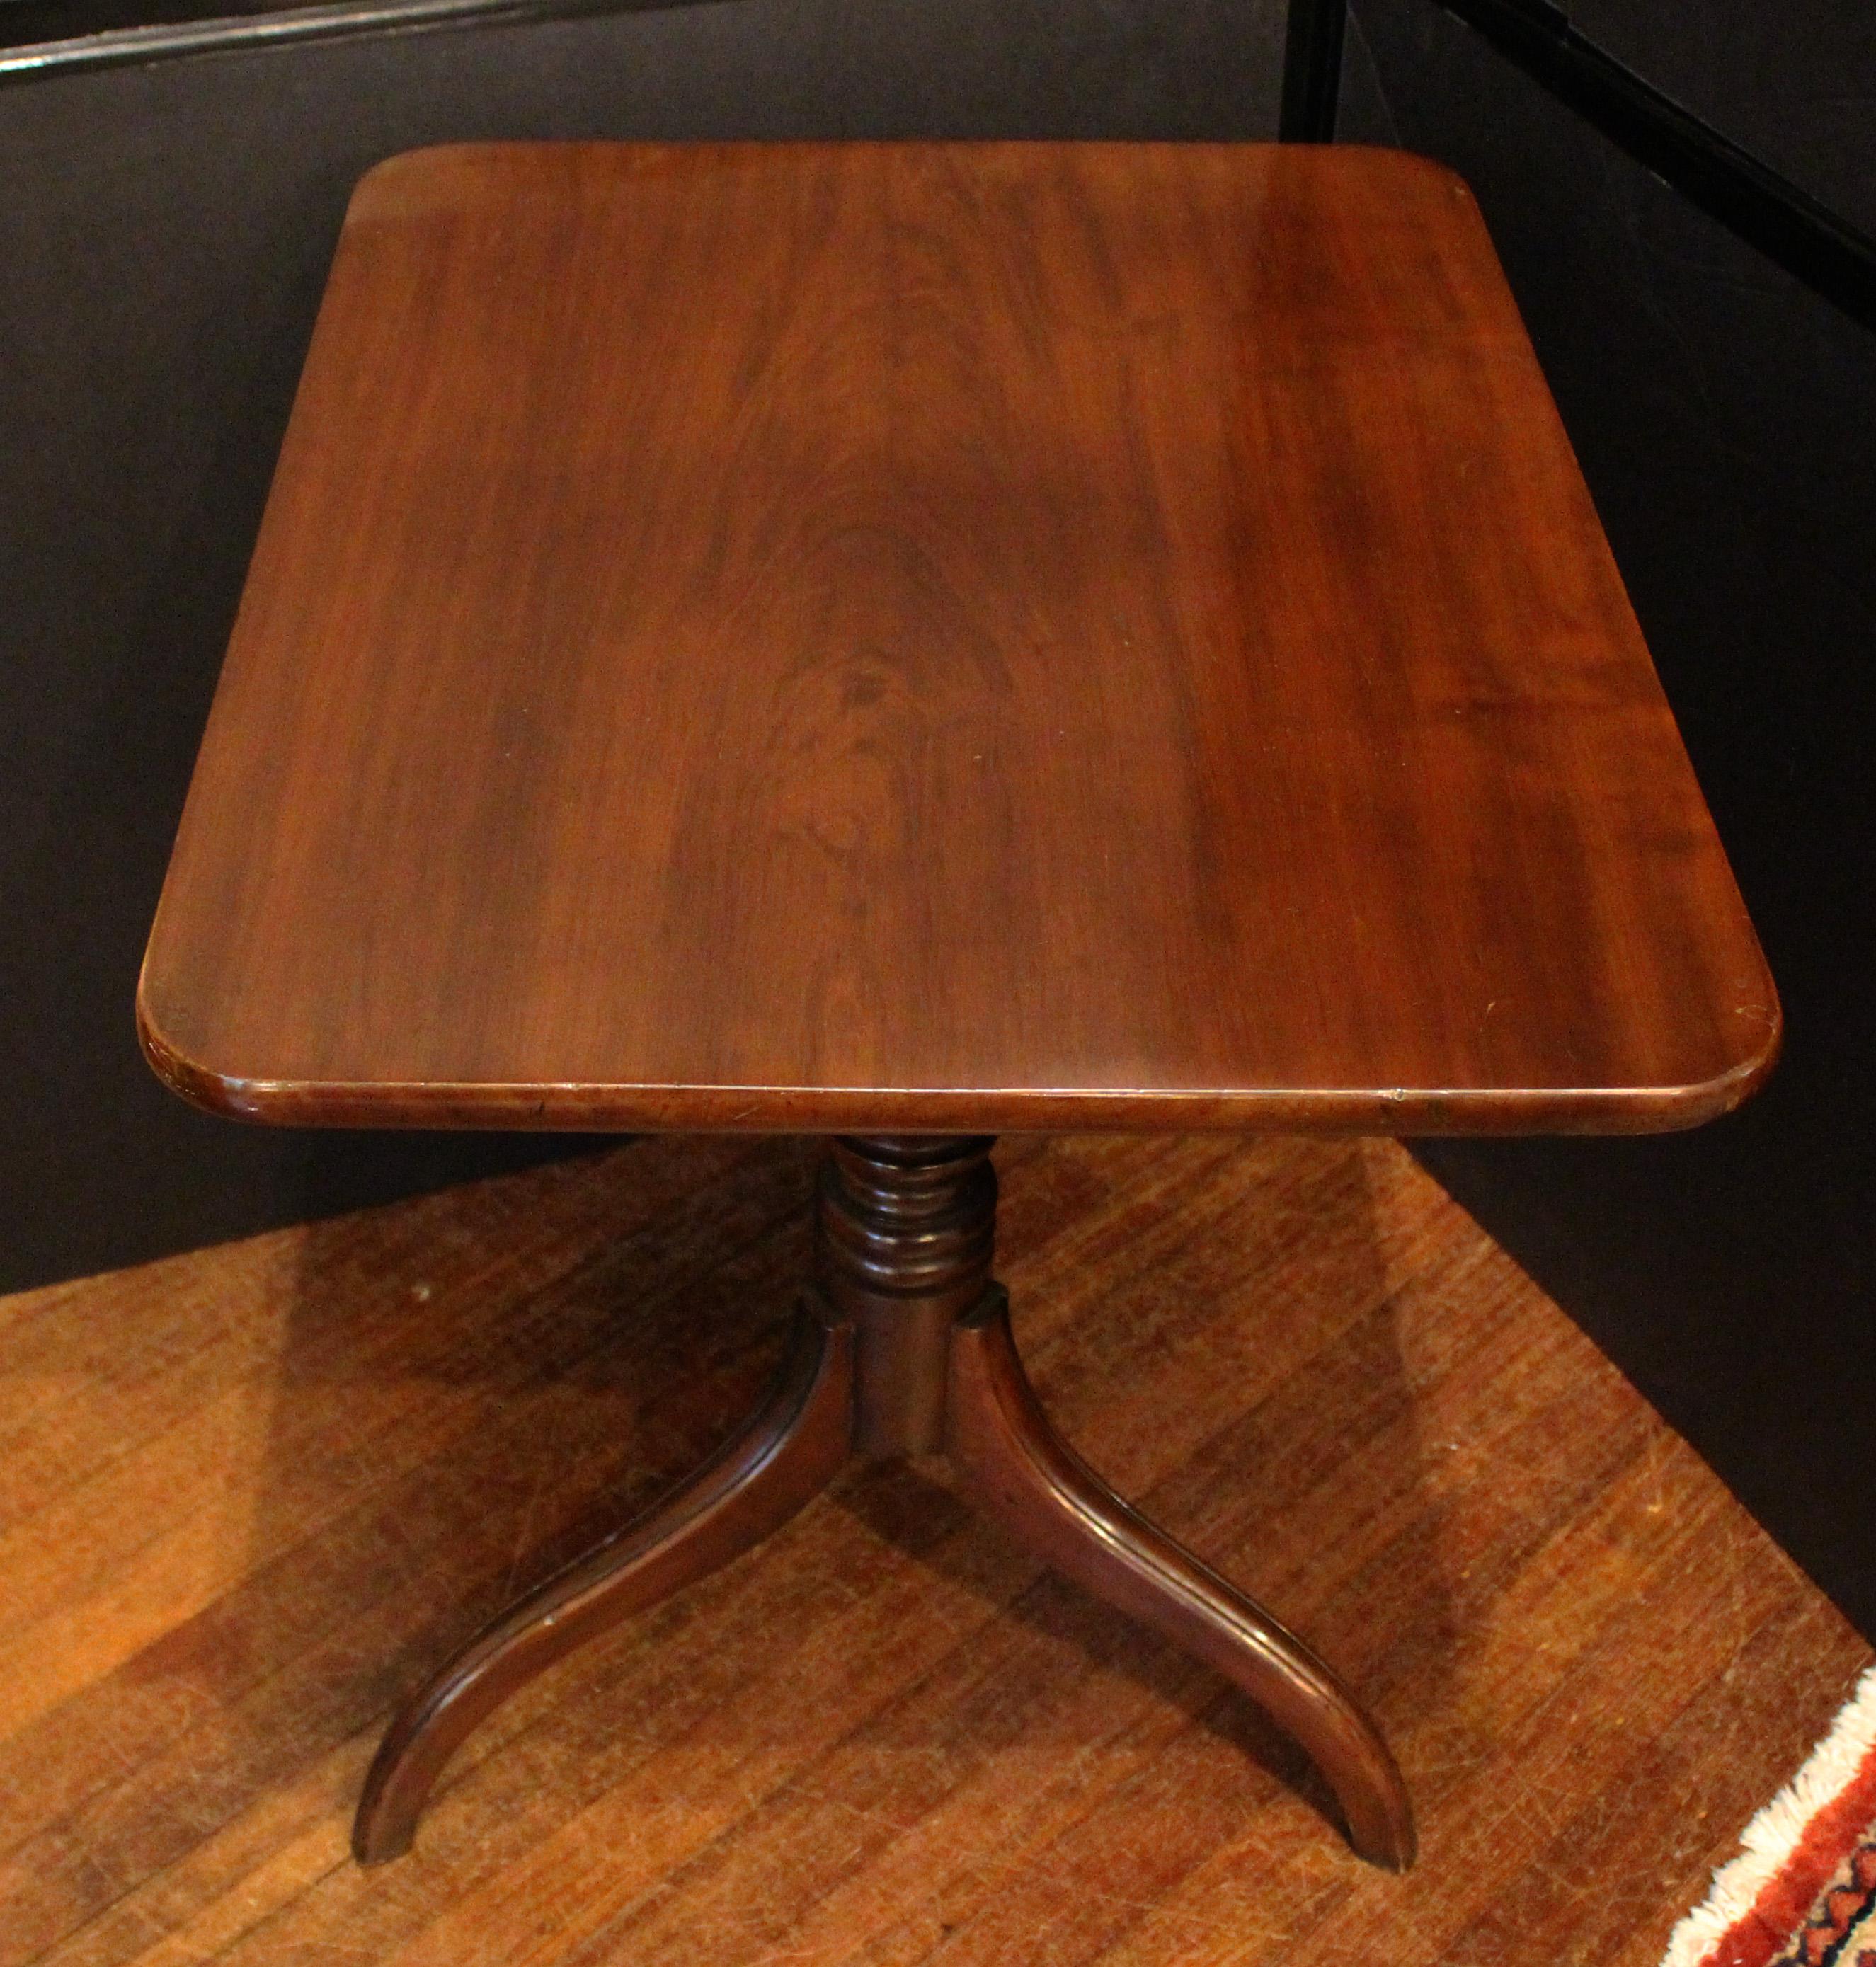 Early 19th century tilt-top side table, English. George IV to William IV period. Rectangular top with rounded corners, raised on molded tripod base with very well turned standard. Fine quality mahogany. 27 7/8